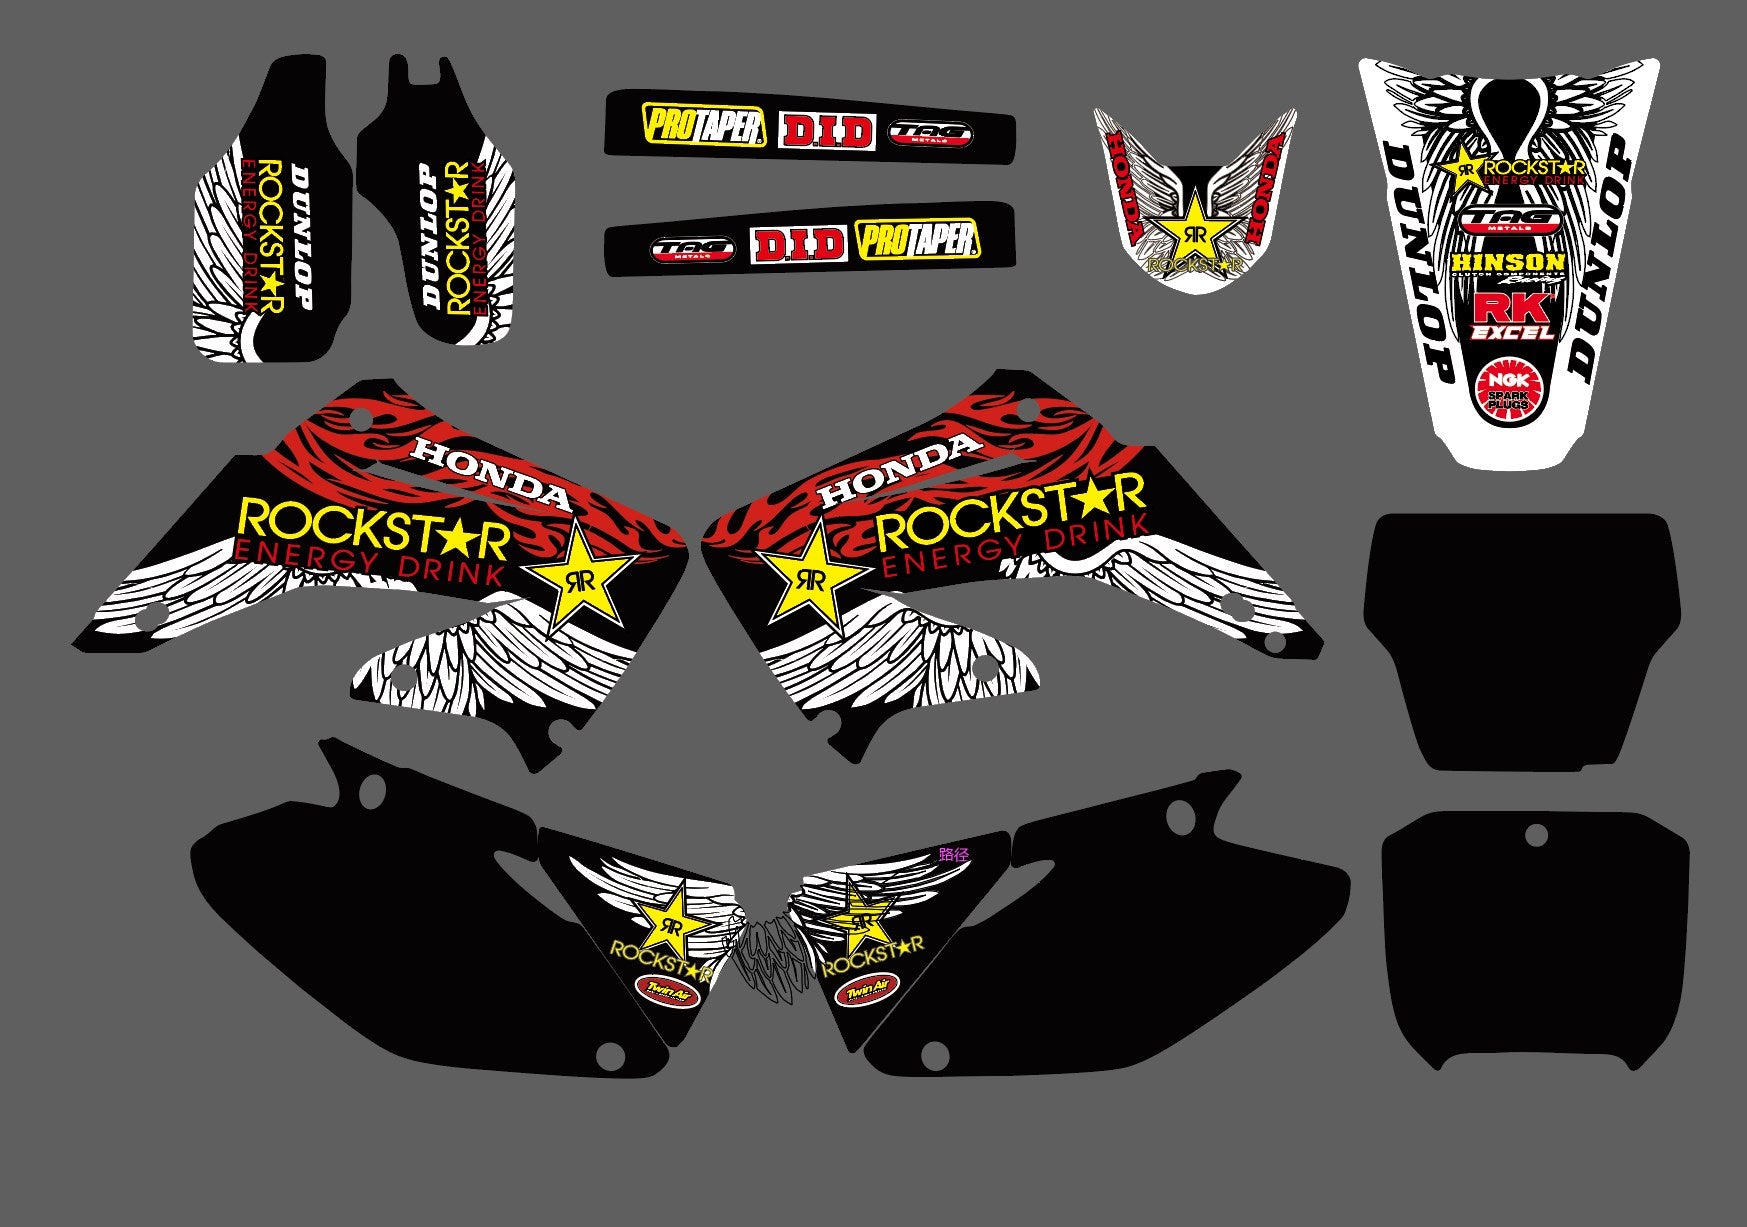 Team Graphics Backgrounds Decals Stickers For HONDA CR125/CR250 2002-2012